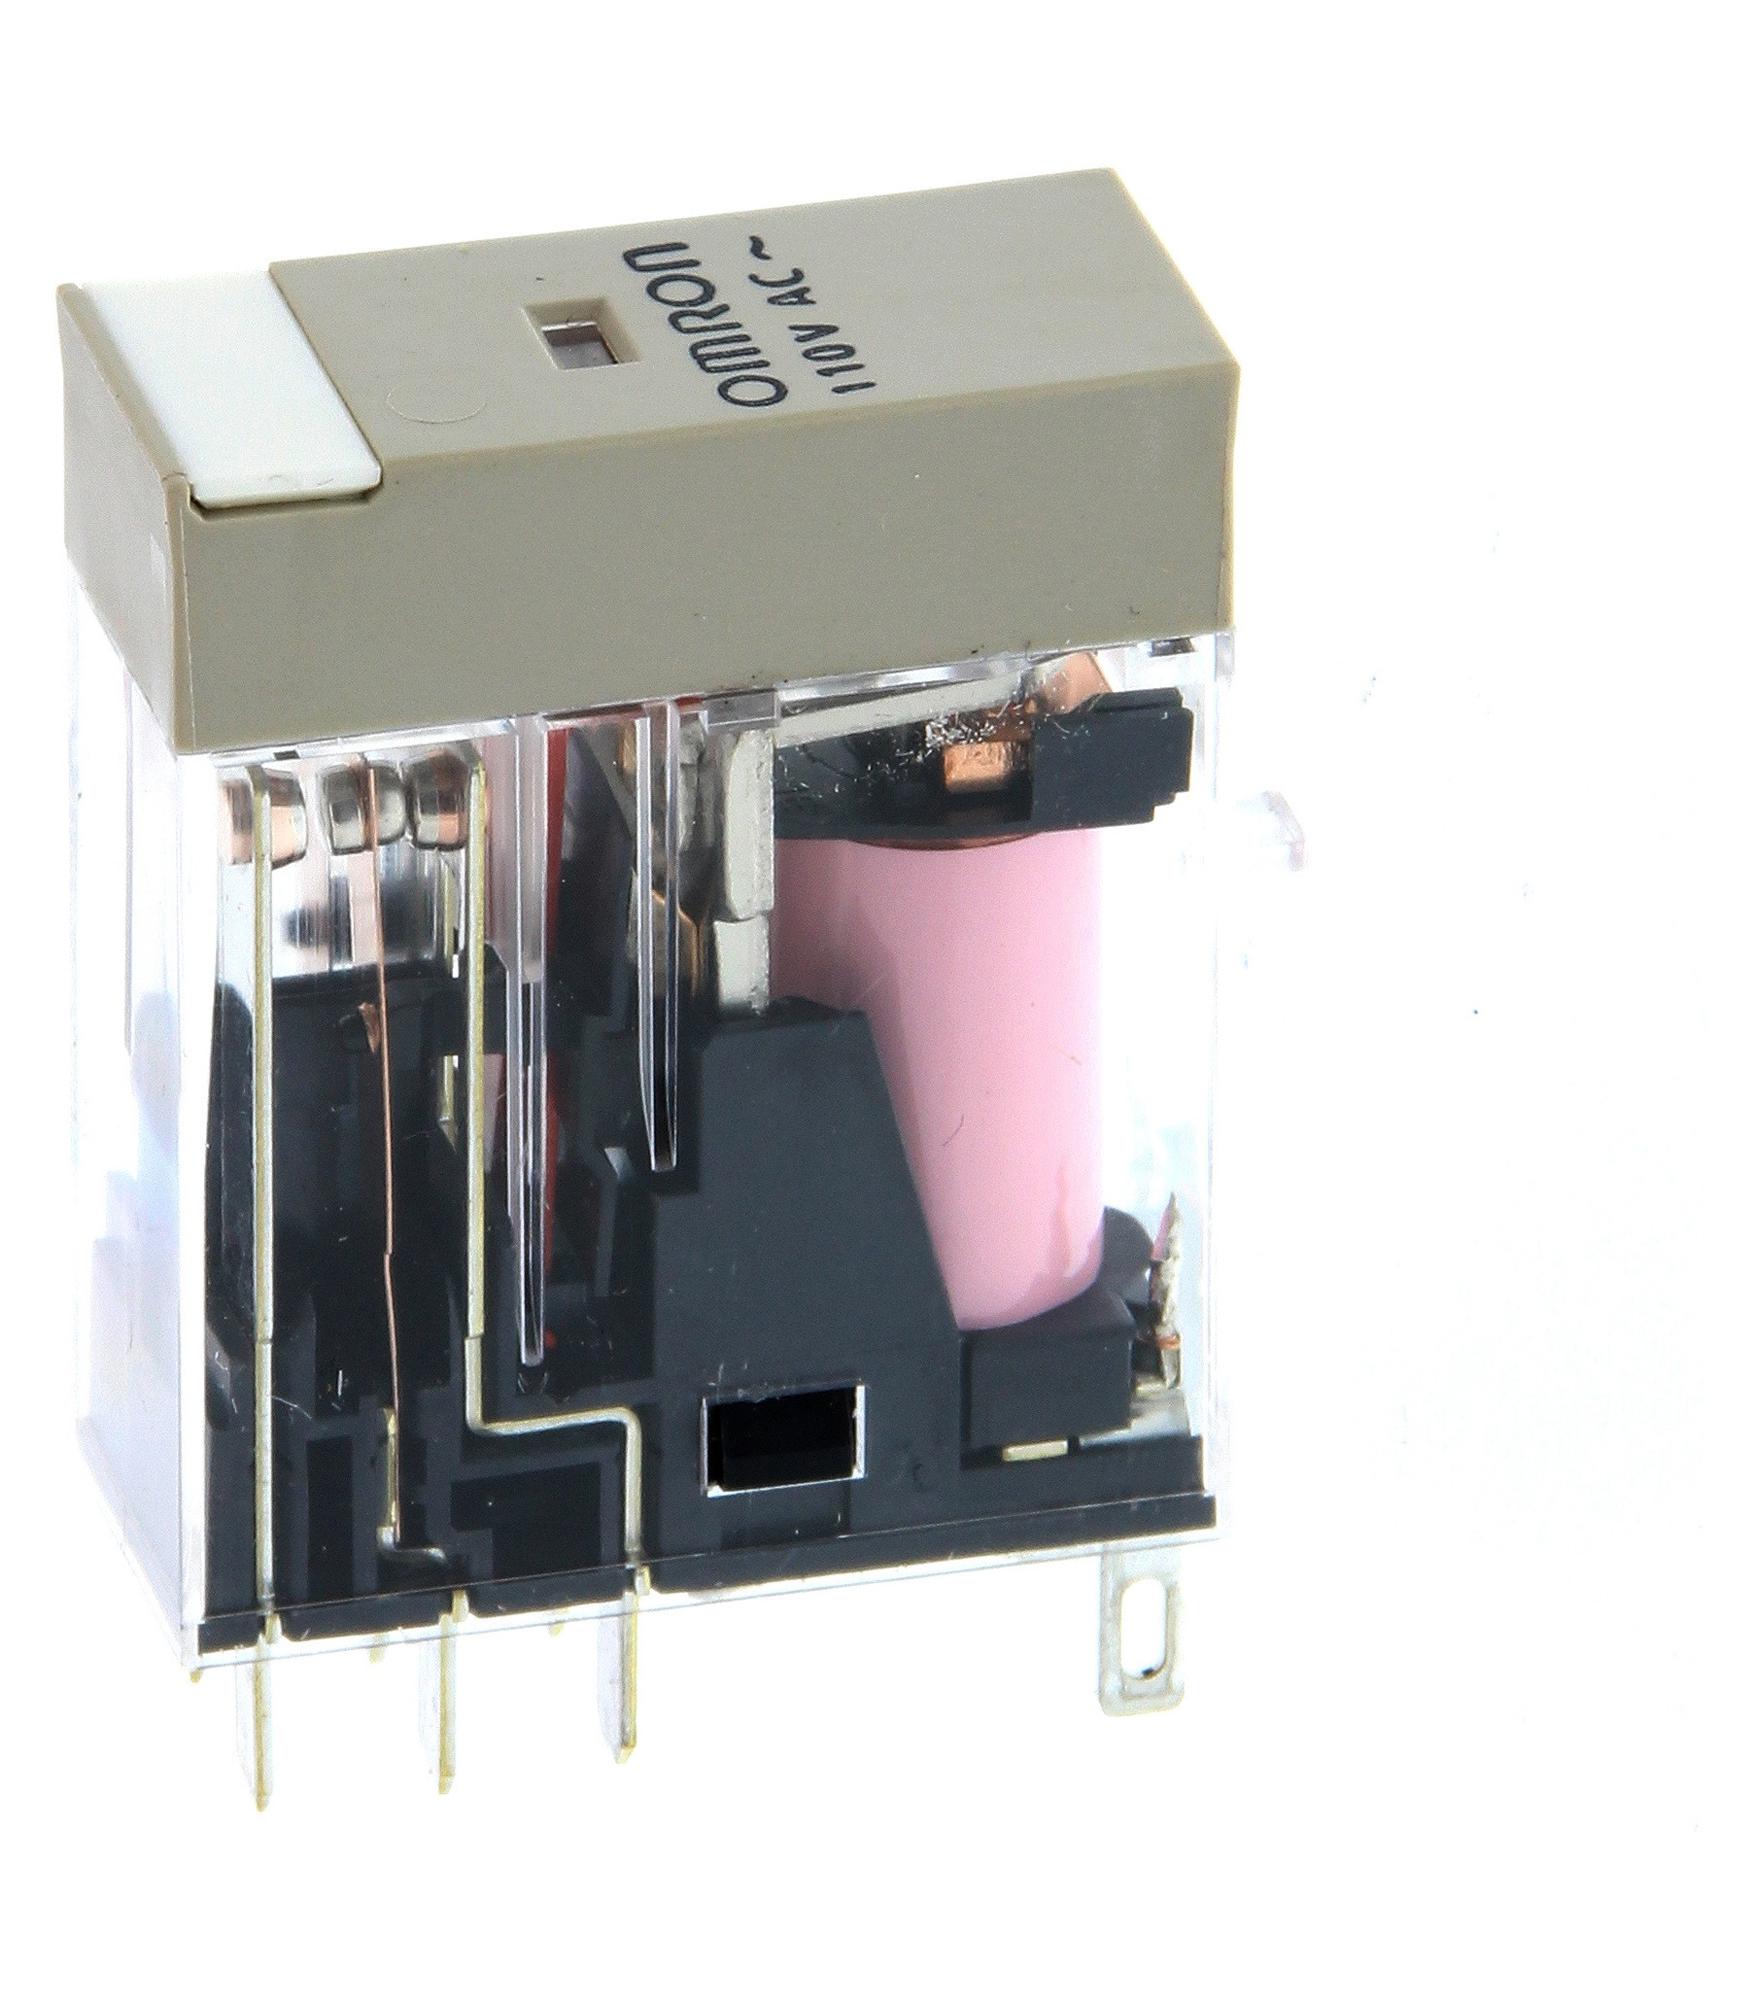 G2R-2-S 110VAC (S) POWER - GENERAL PURPOSE RELAYS OMRON